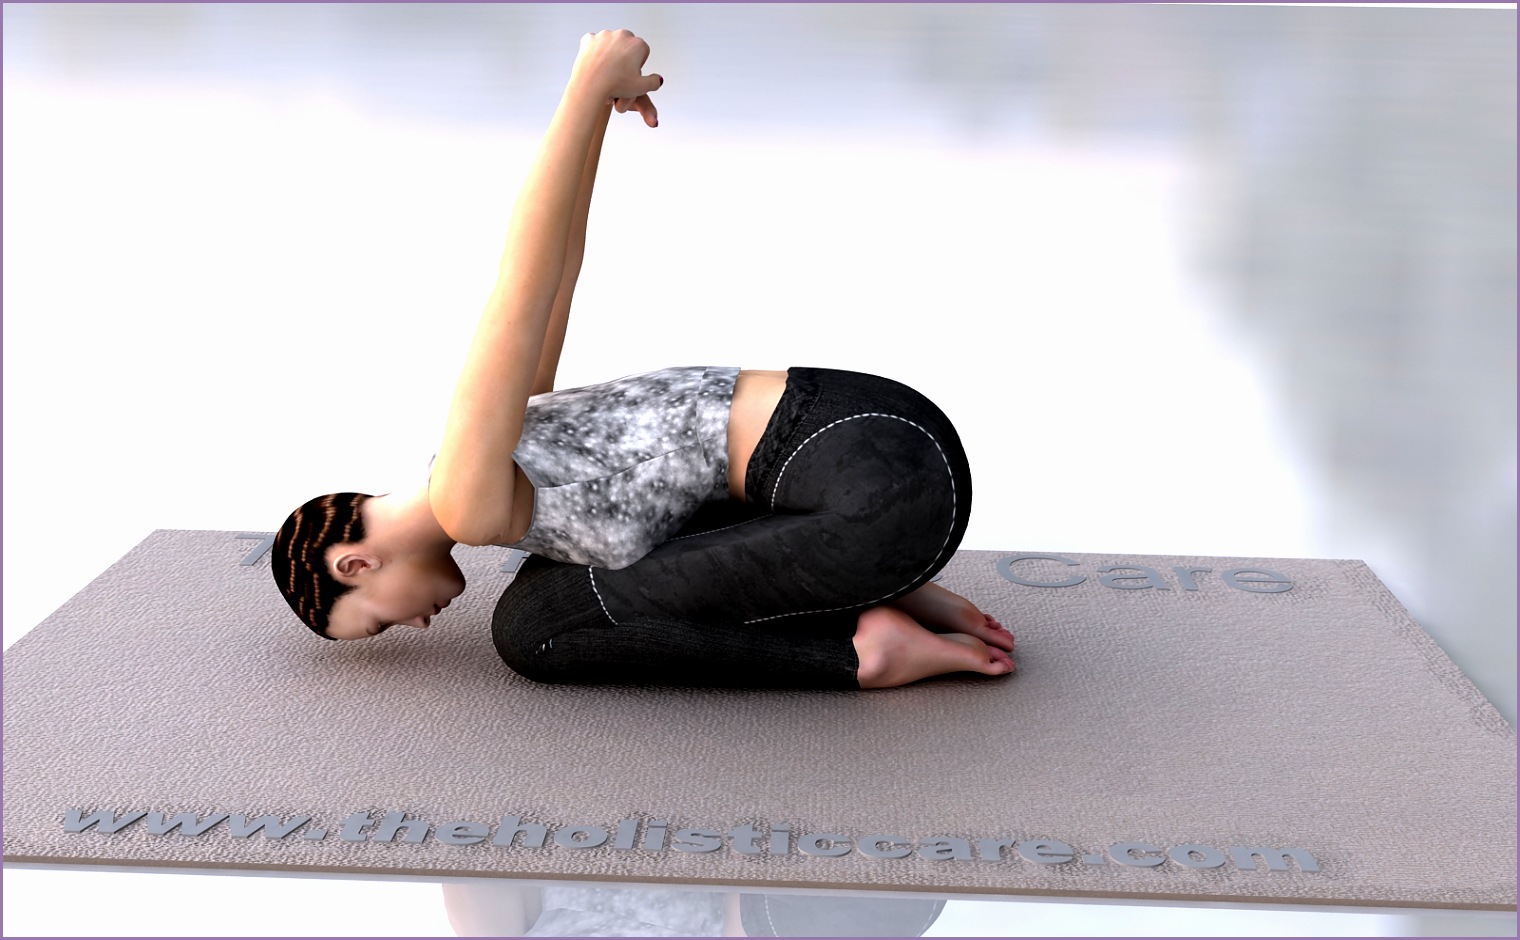 8 Yoga Mudra Pose - Work Out Picture Media - Work Out Picture Media